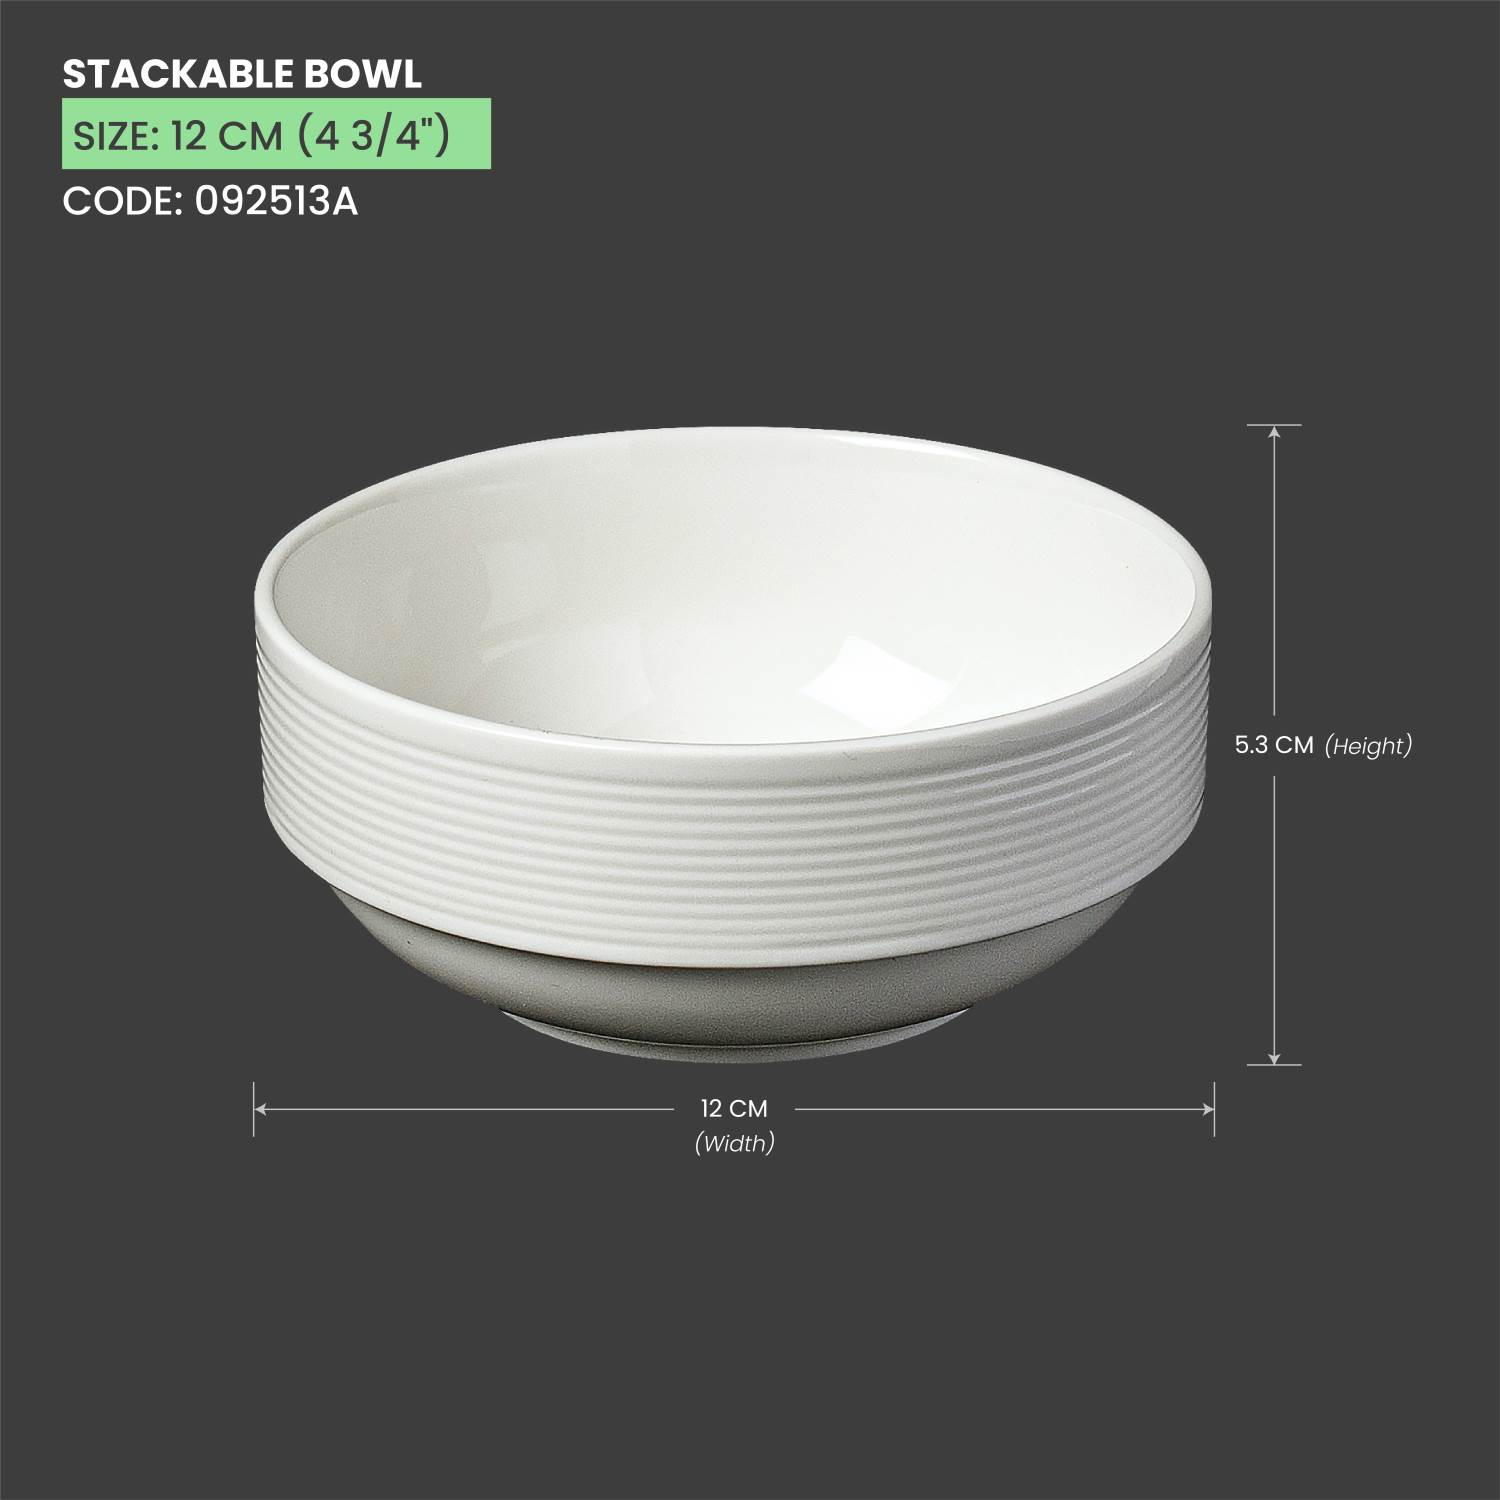 Baralee Wish Stackable Bowl 12 Cm